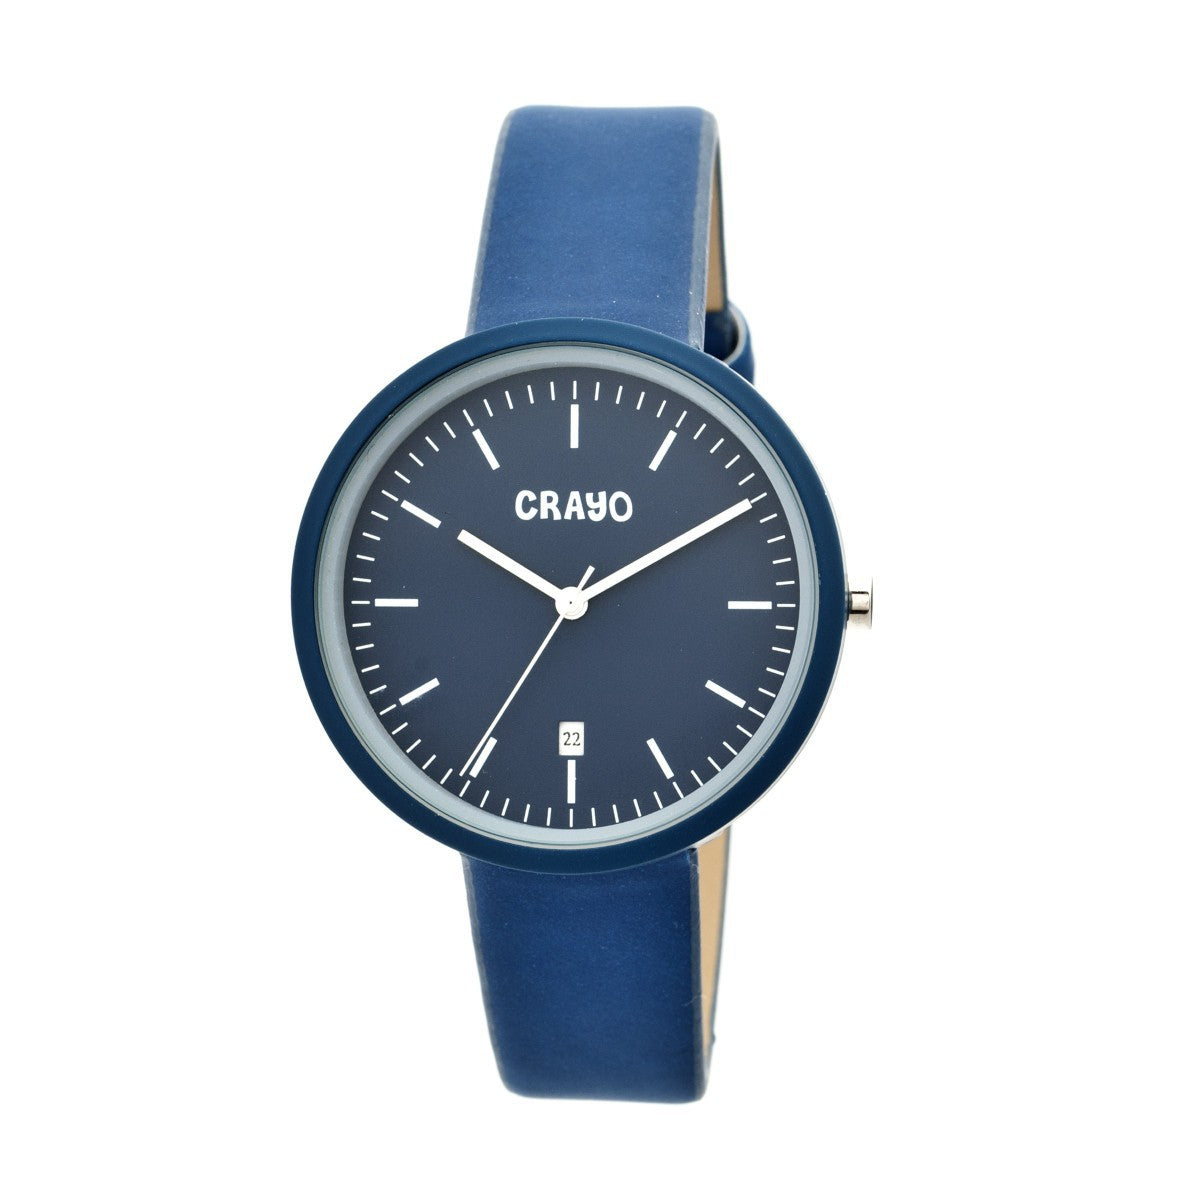 Crayo Easy Leather-Band Unisex Watch w/ Date - Navy - CRACR2407